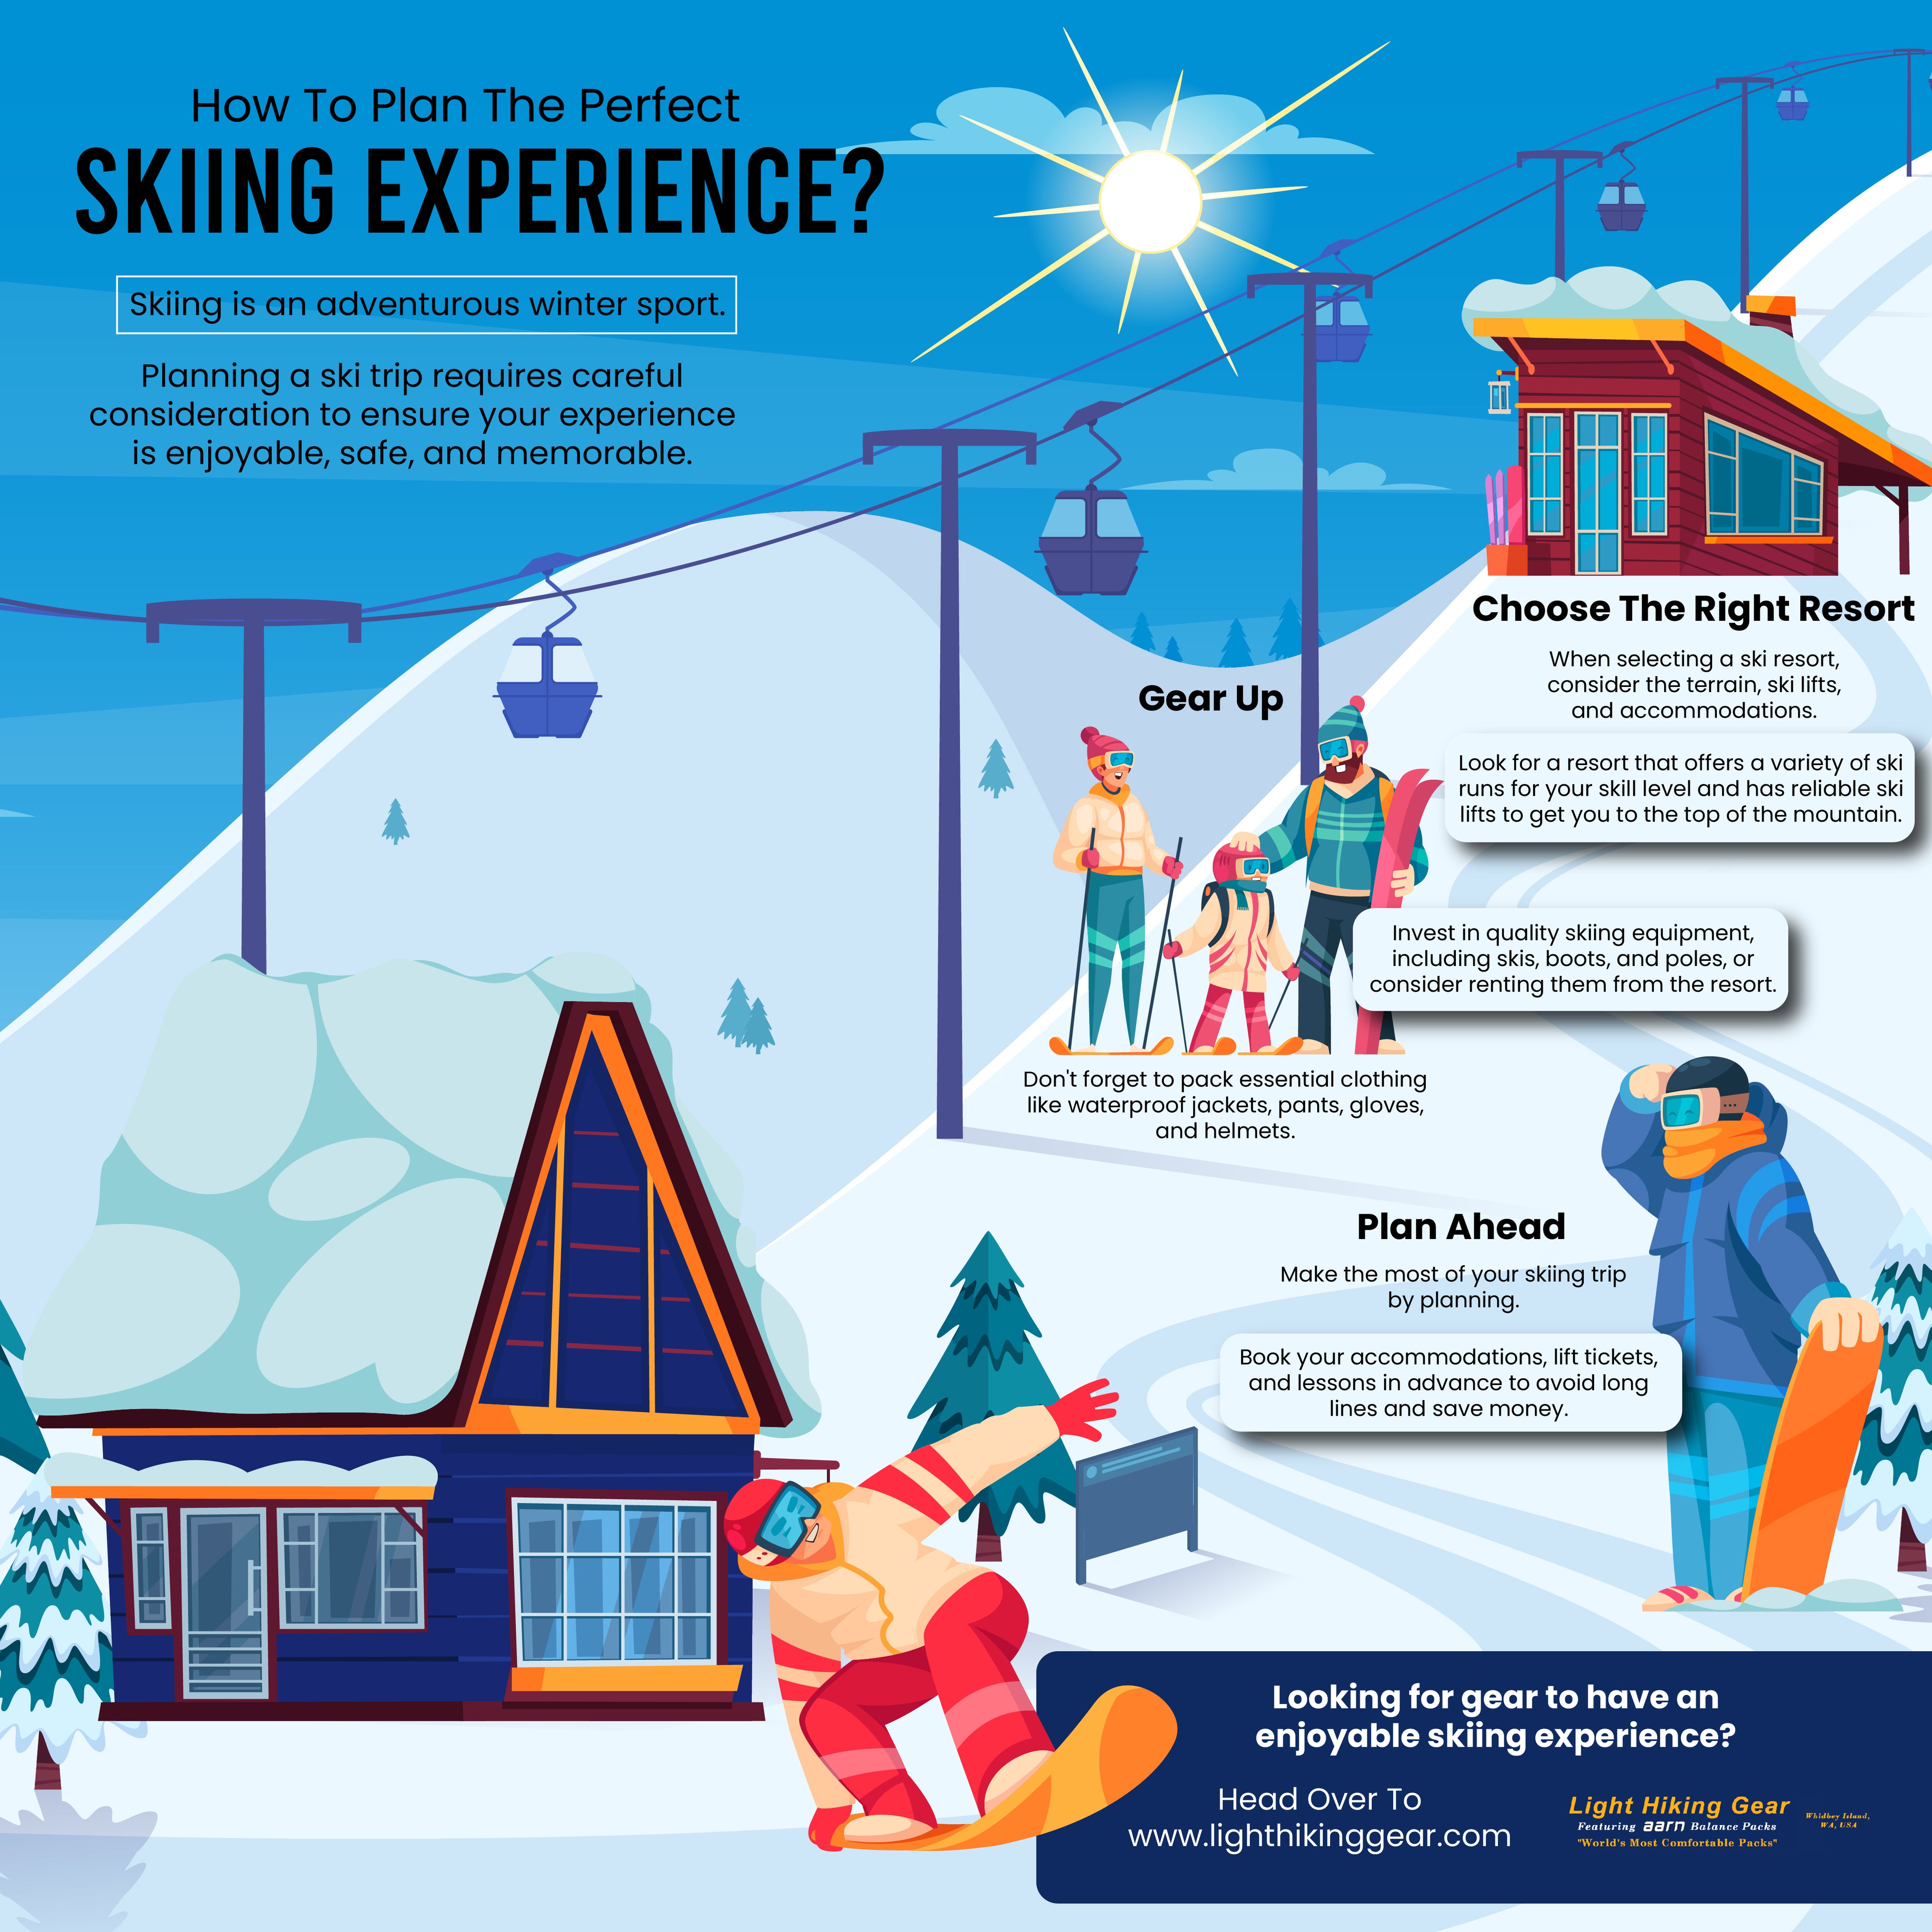 How To Plan The Perfect Skiing Experience?